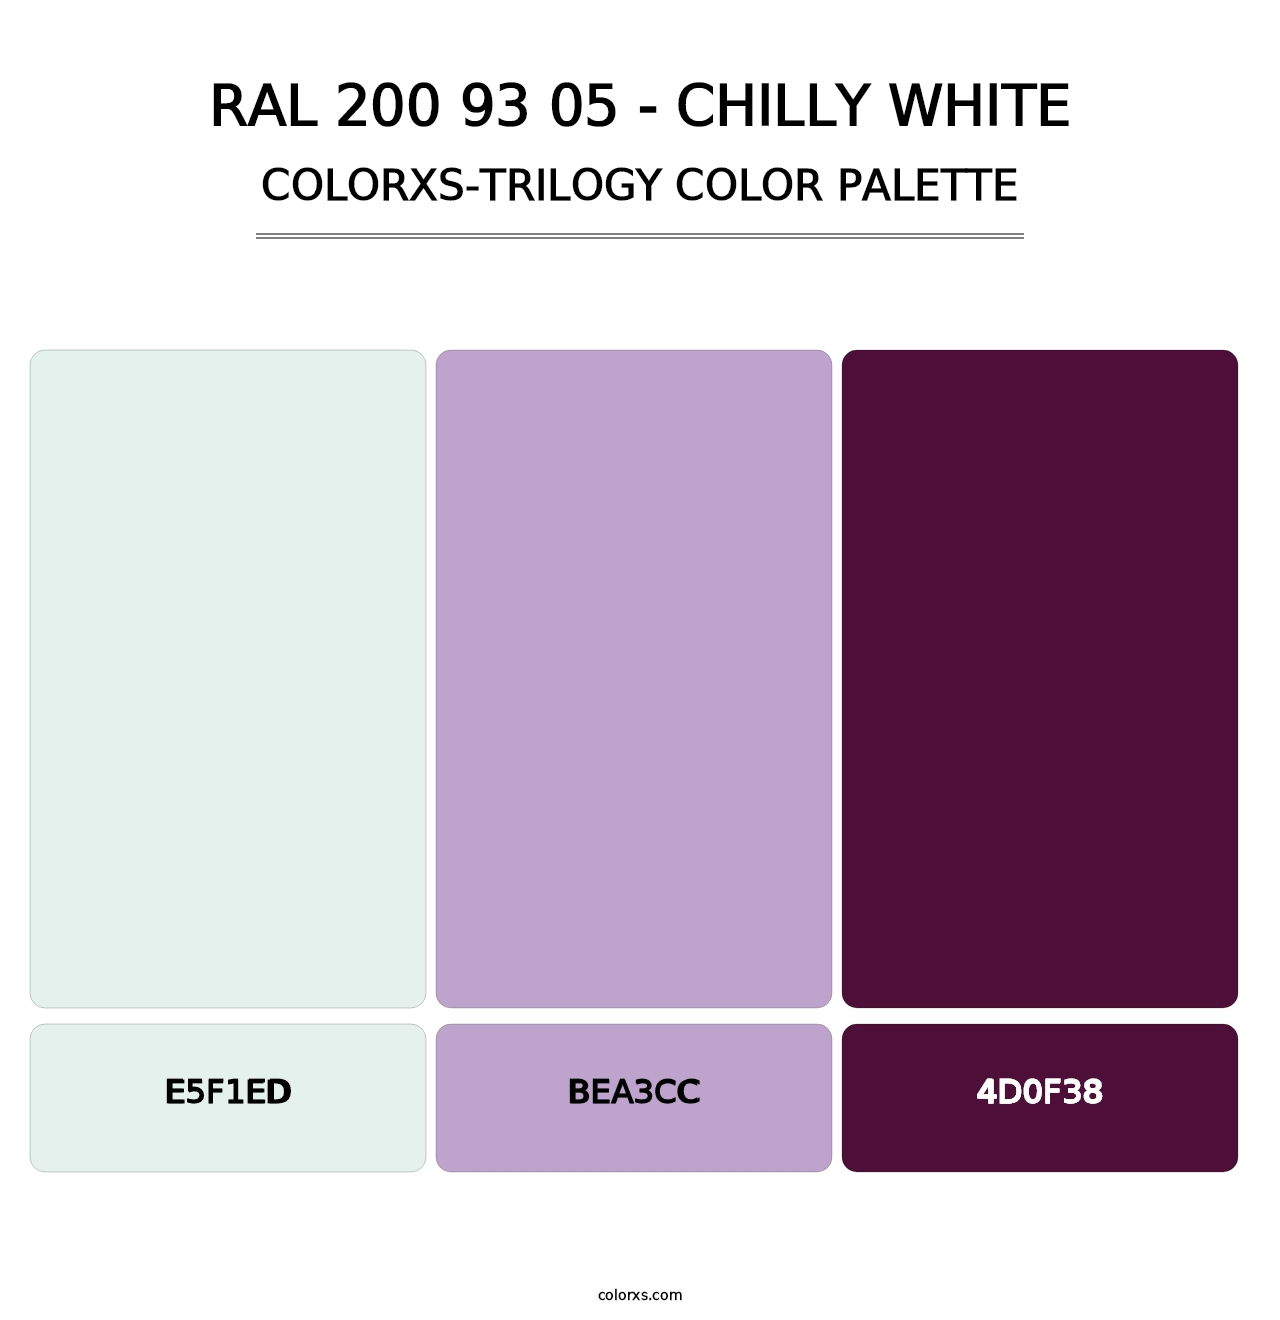 RAL 200 93 05 - Chilly White - Colorxs Trilogy Palette